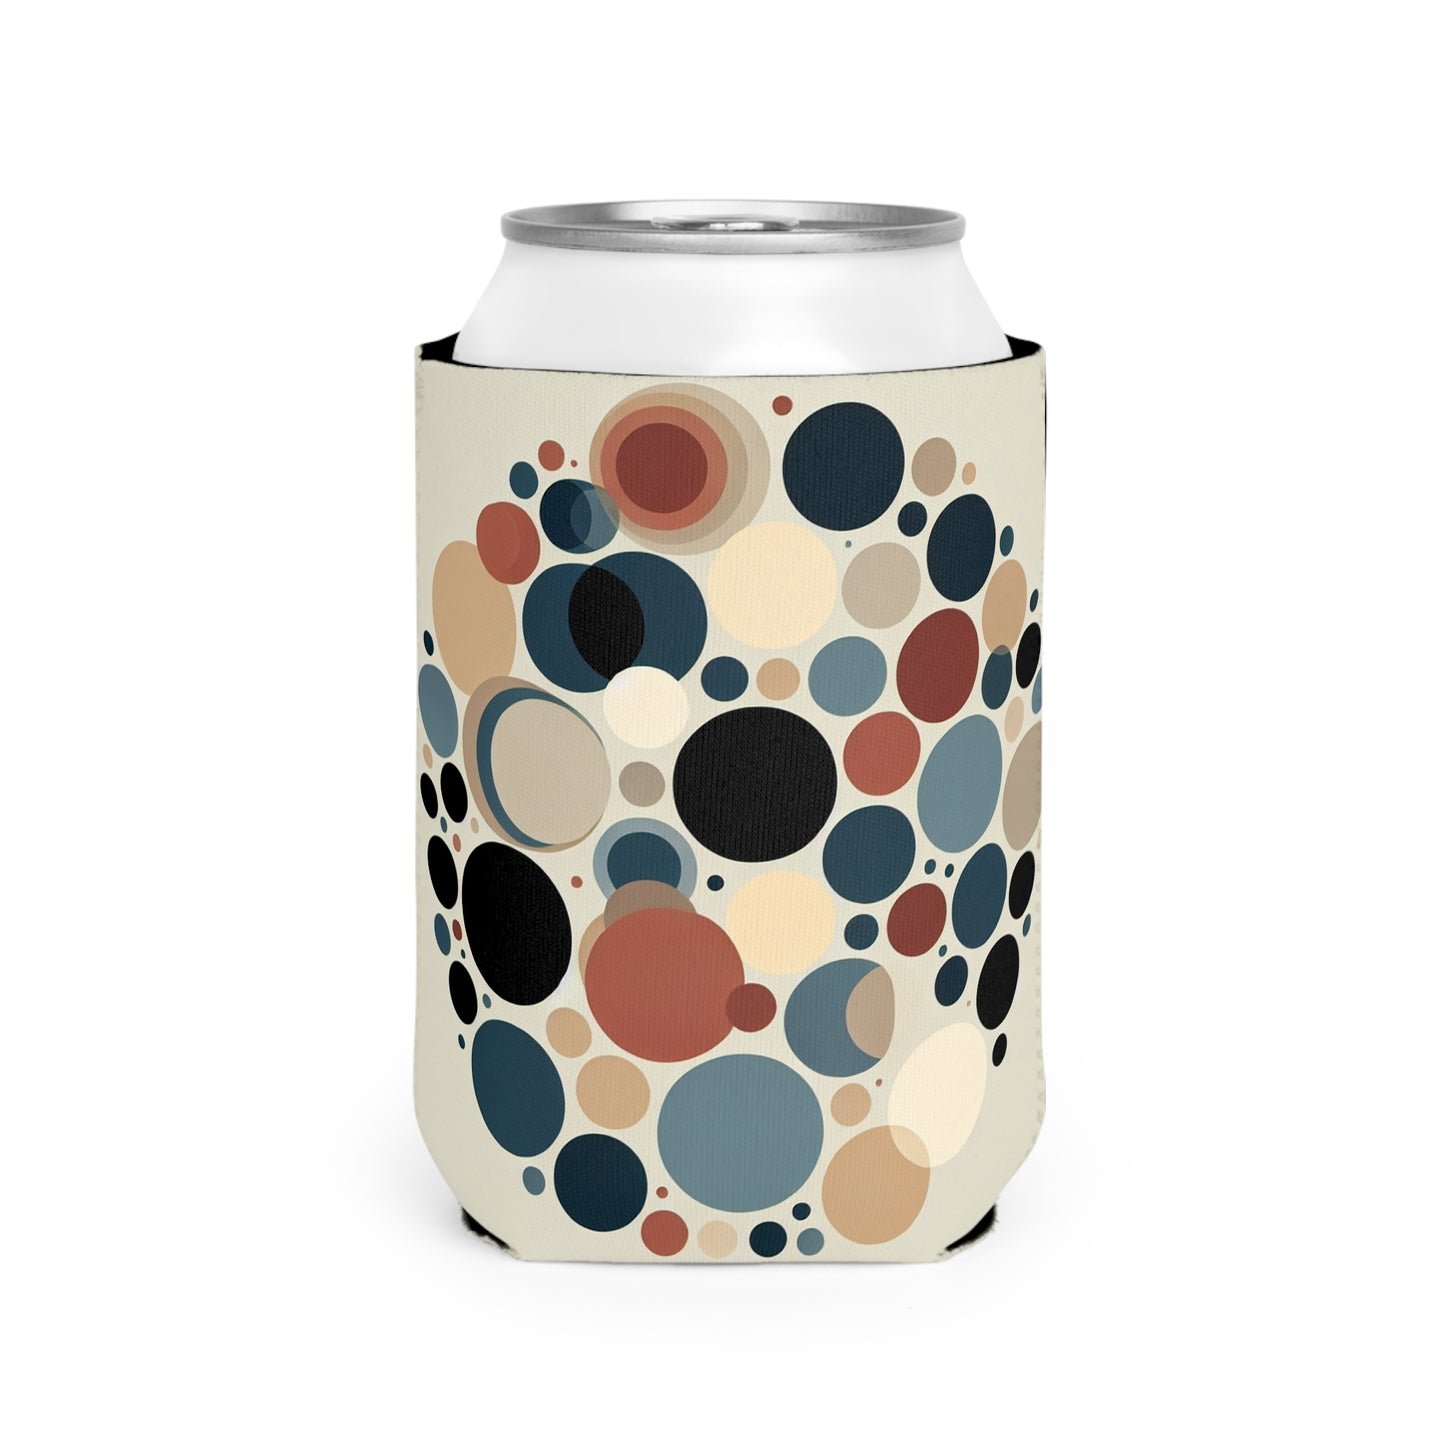 "Interwoven Circles: A Minimalist Approach" - The Alien Can Cooler Sleeve Minimalism Style